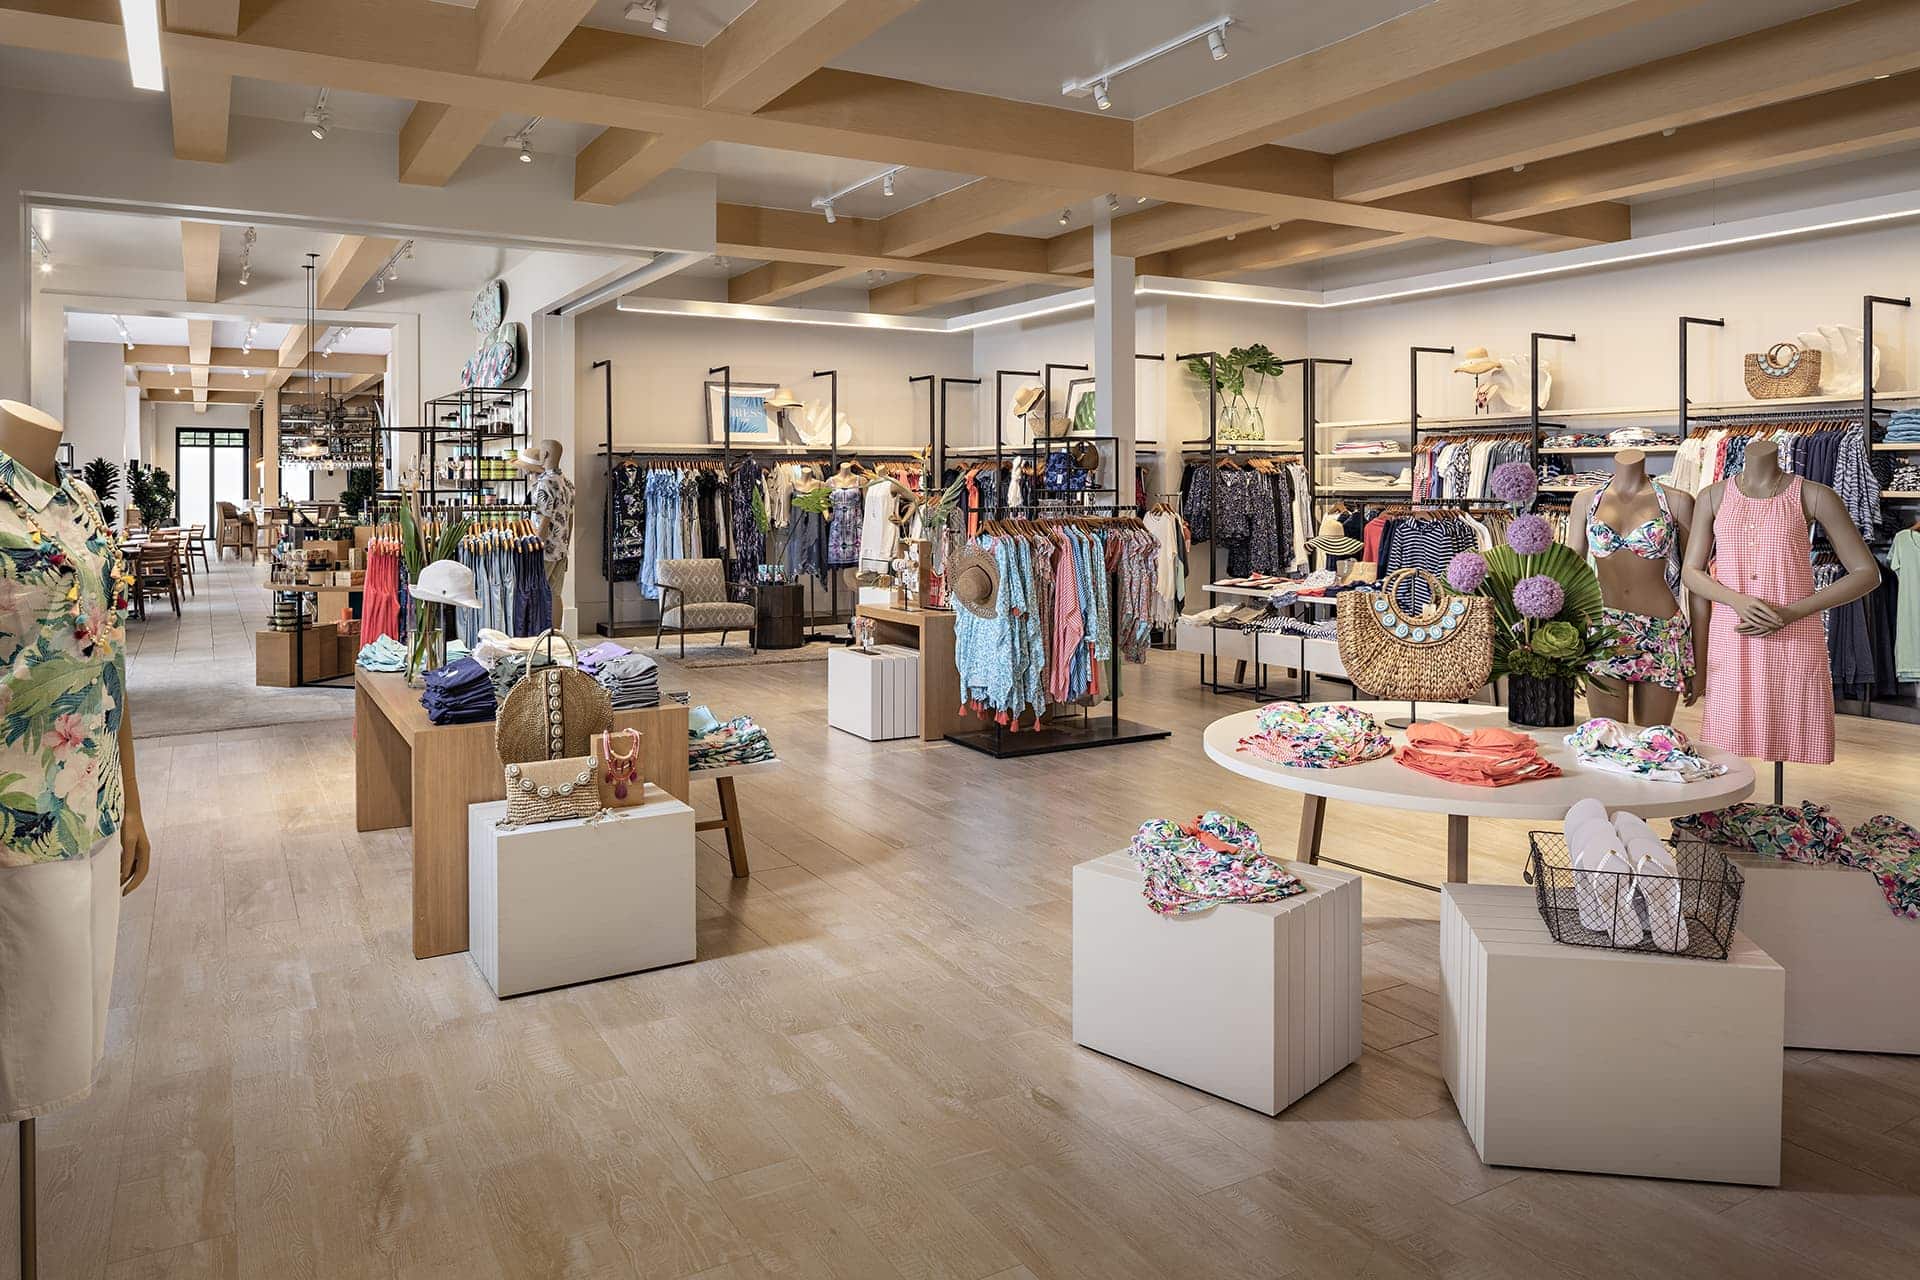 Tommy Bahama store interior with women's and men's wear displayed across racks, shelves and tables